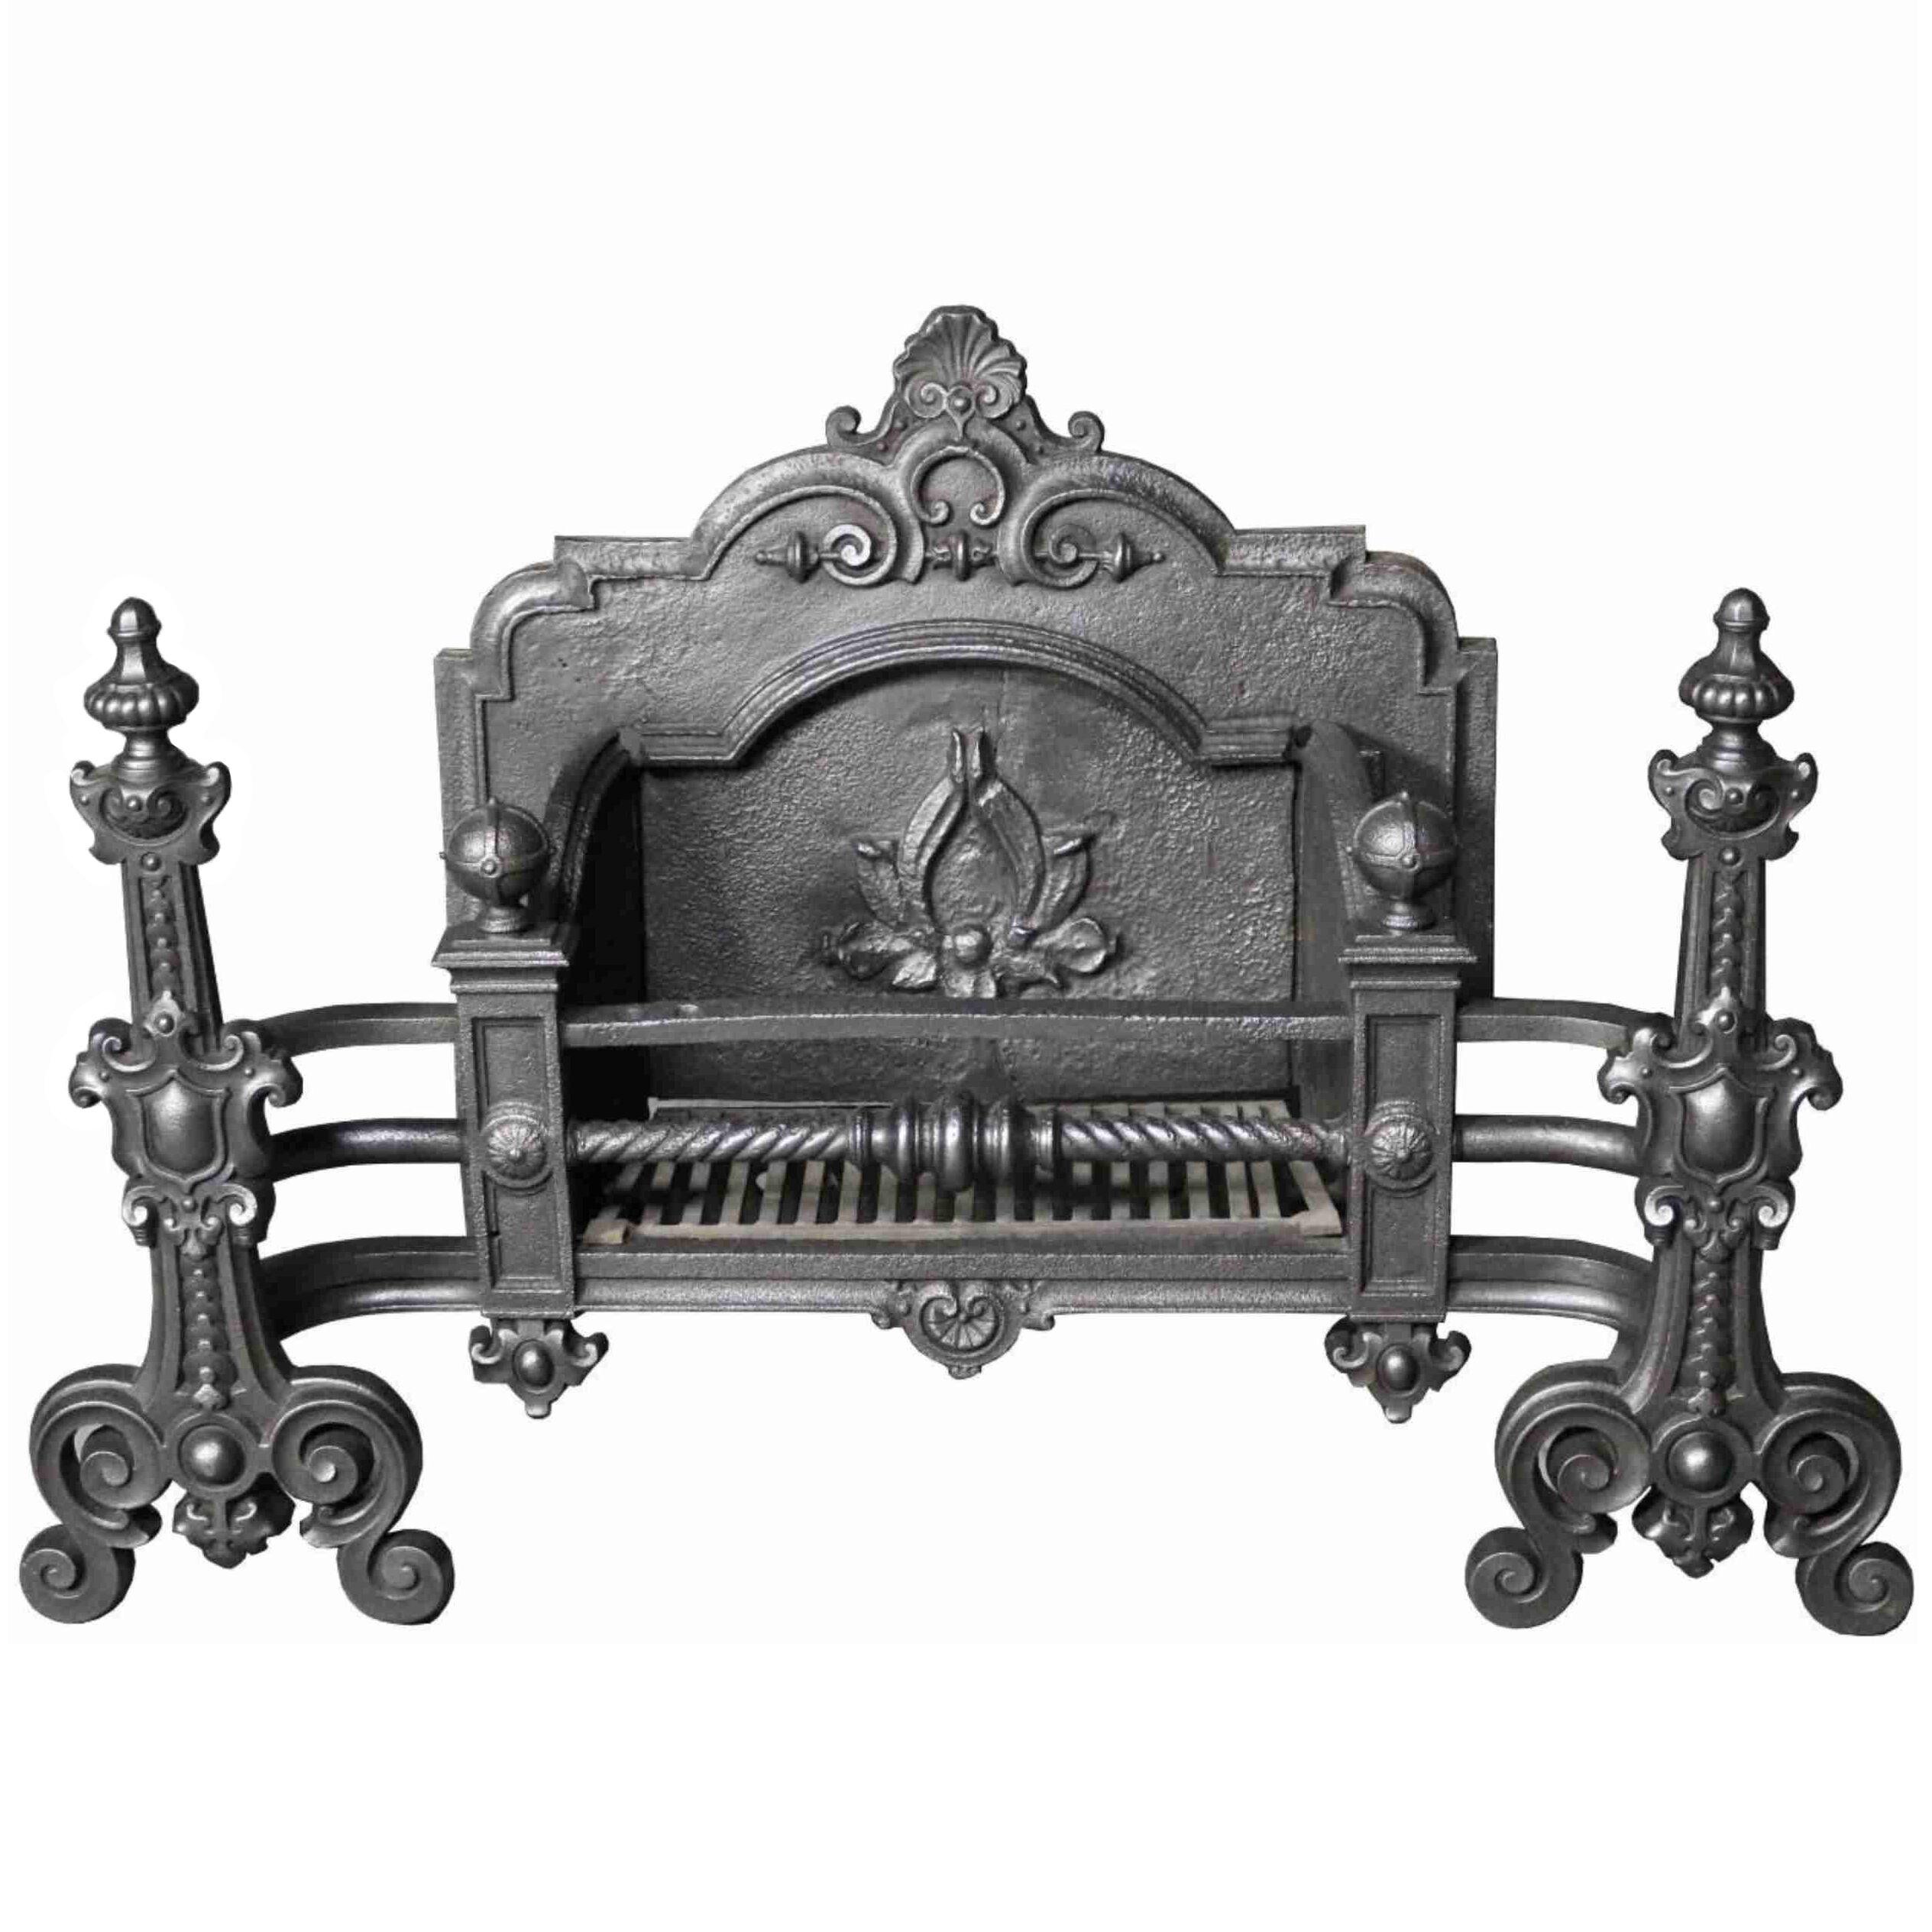 A Late 19th Century Cast Iron Fire Grate